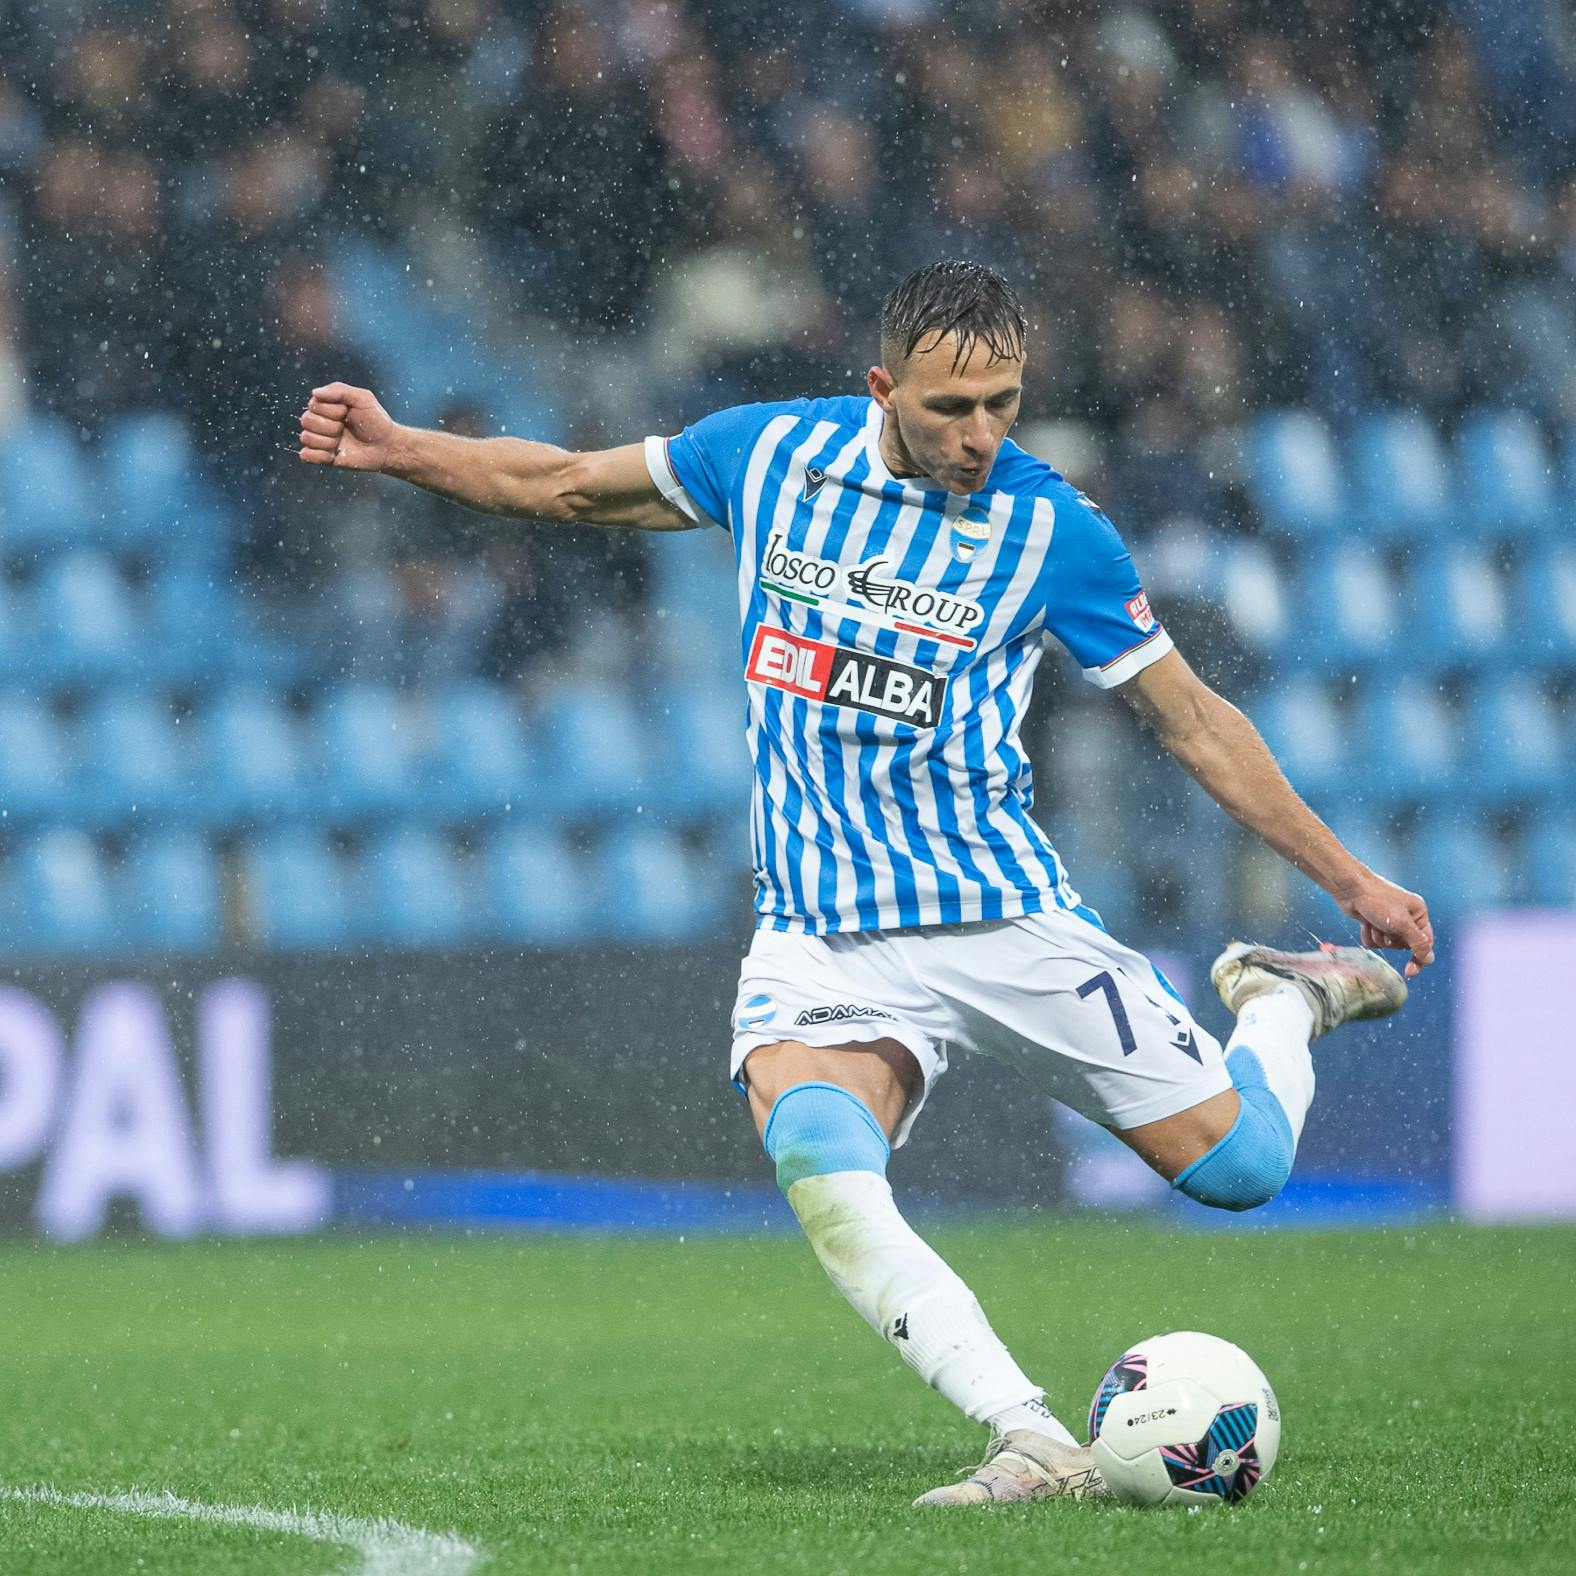 Olbia - SPAL, presale is active for the match against the Sardinians